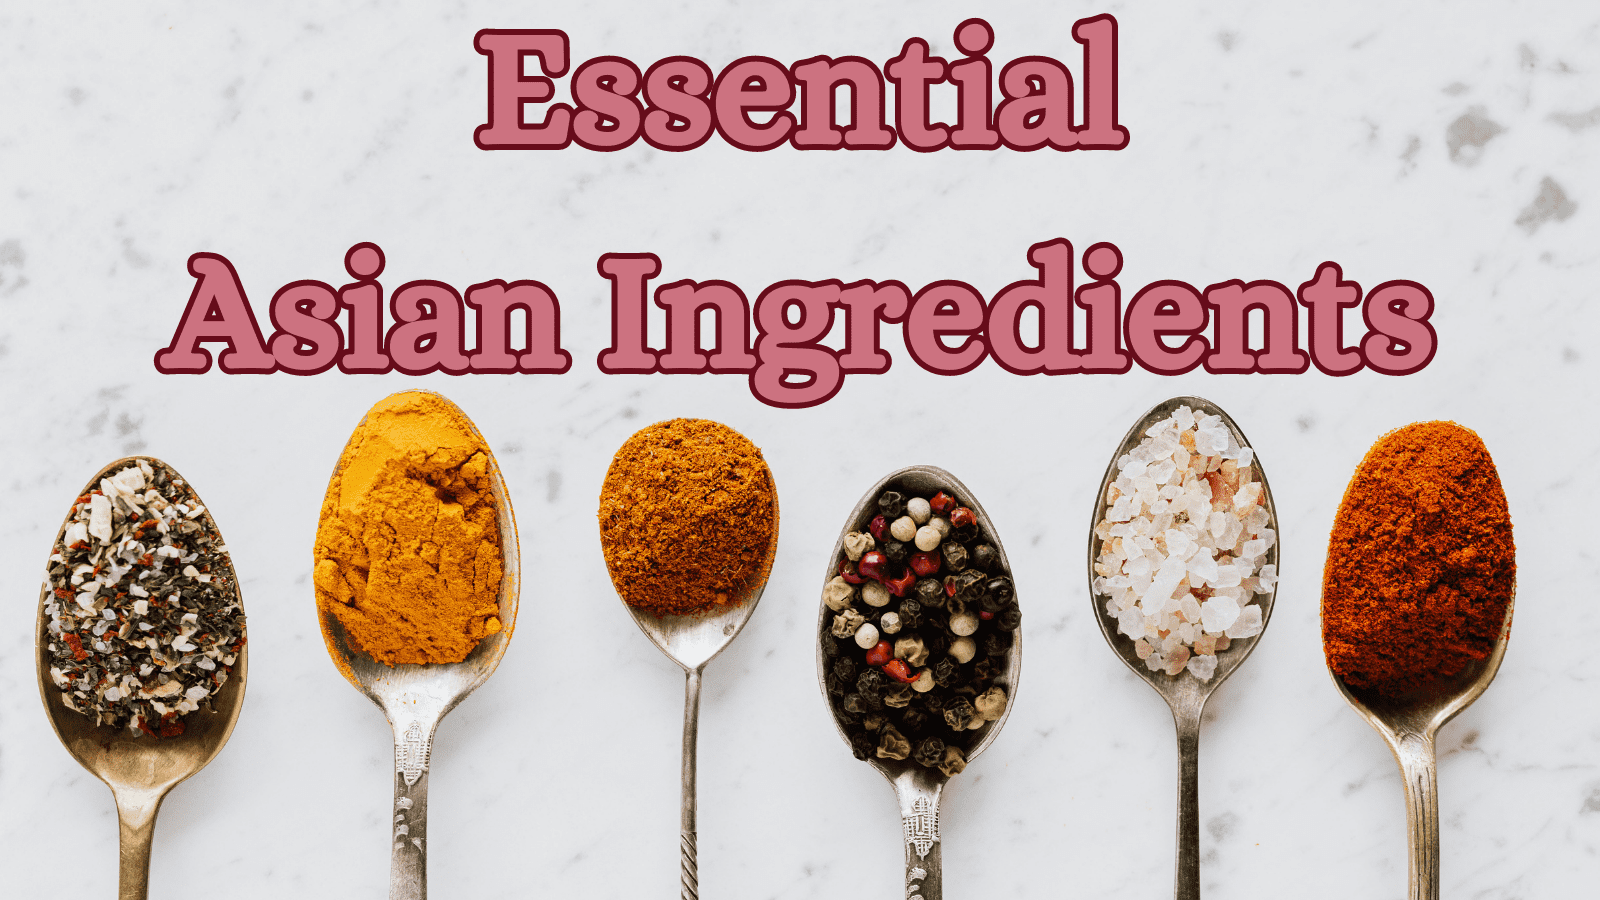 Our Glossary of Asian Ingredients & Terms